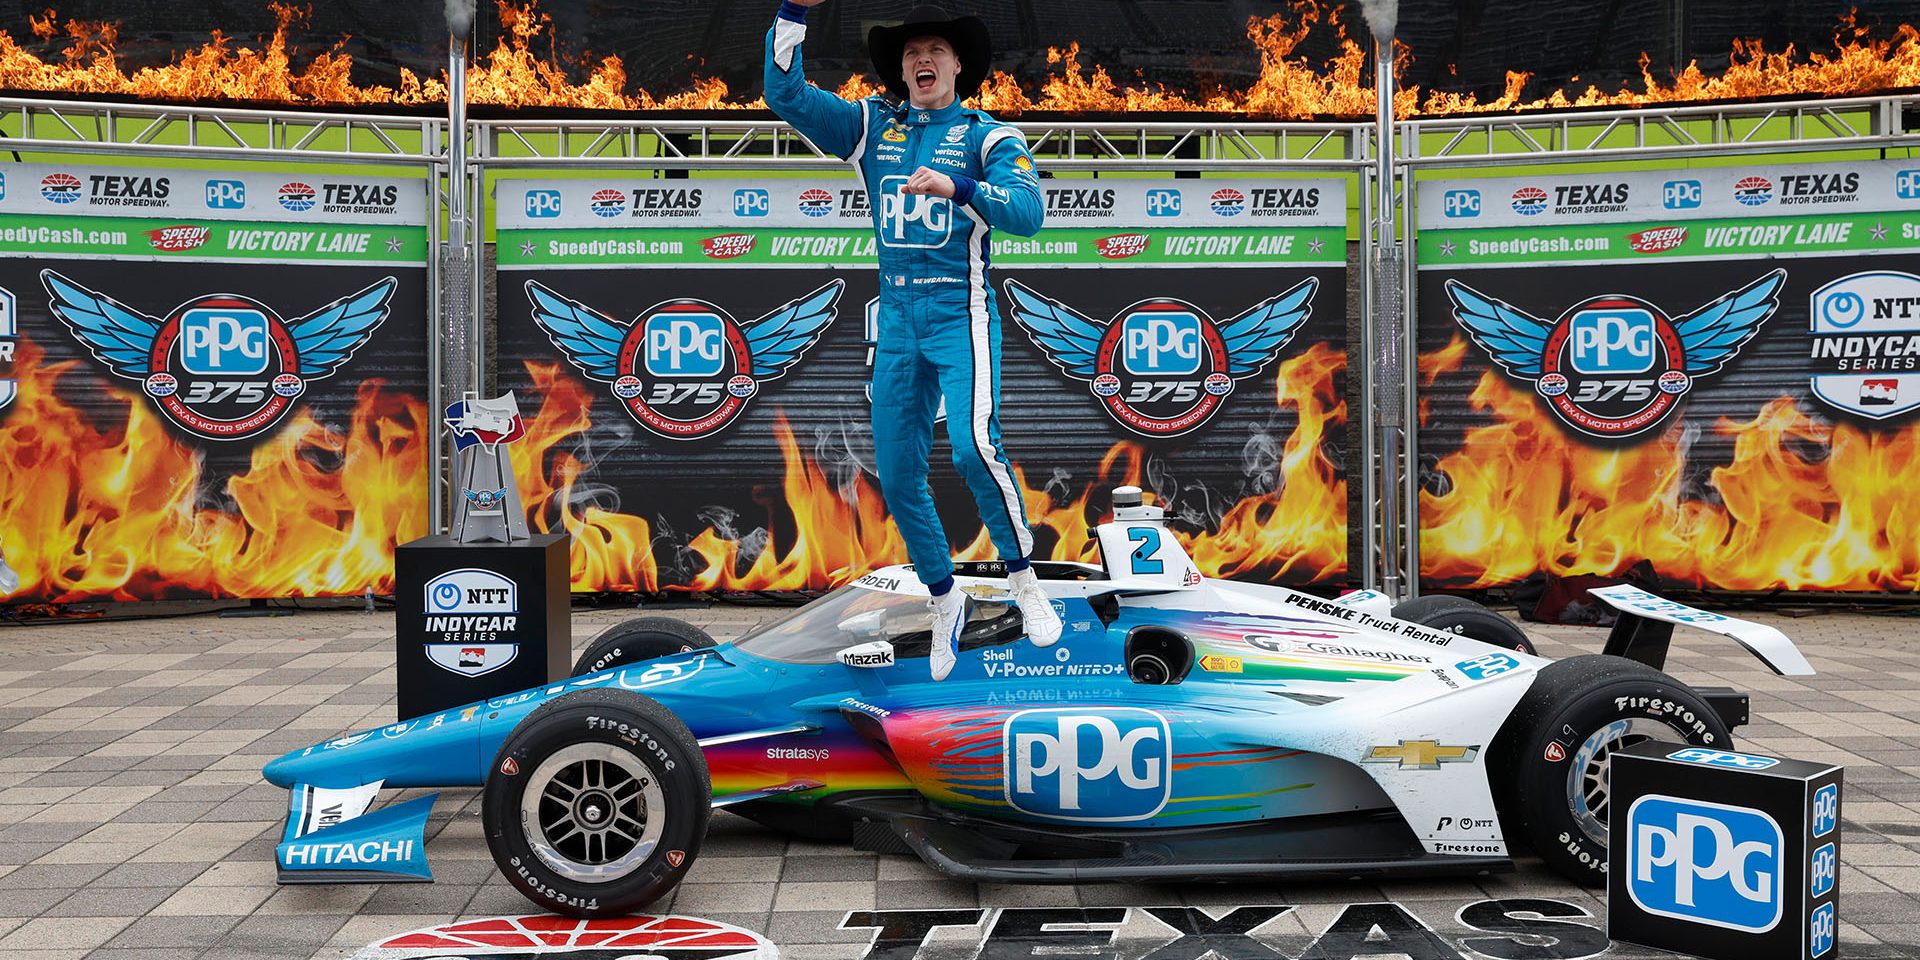 Josef Newgarden Takes Texas Thriller For Second Straight Year